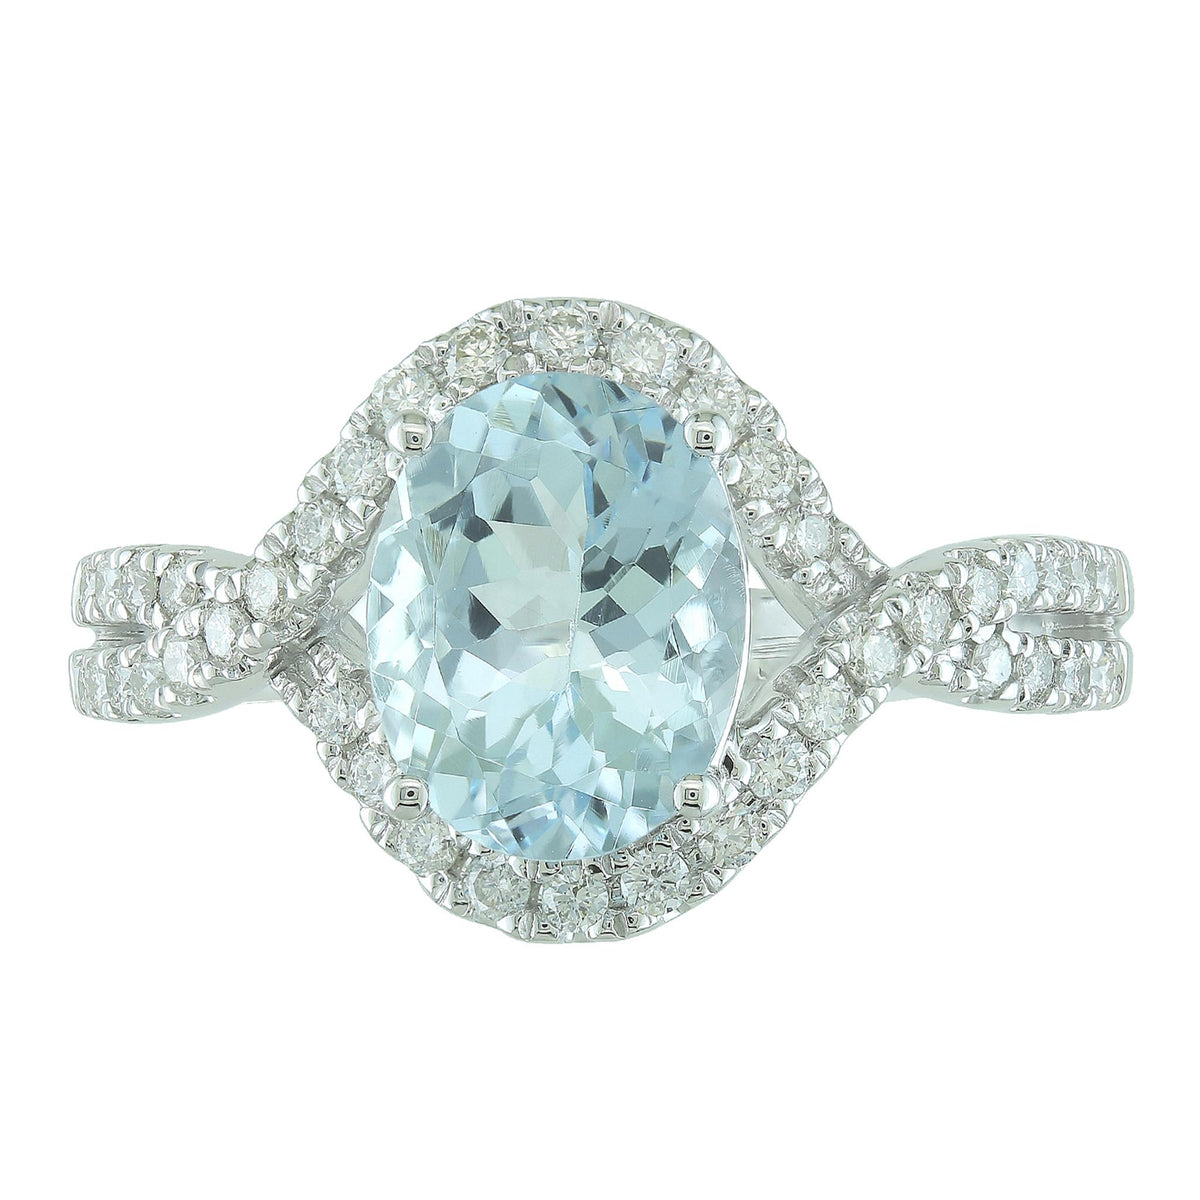 14Kt White Gold Crossover Halo Ring With 1.51ct Aquamarine